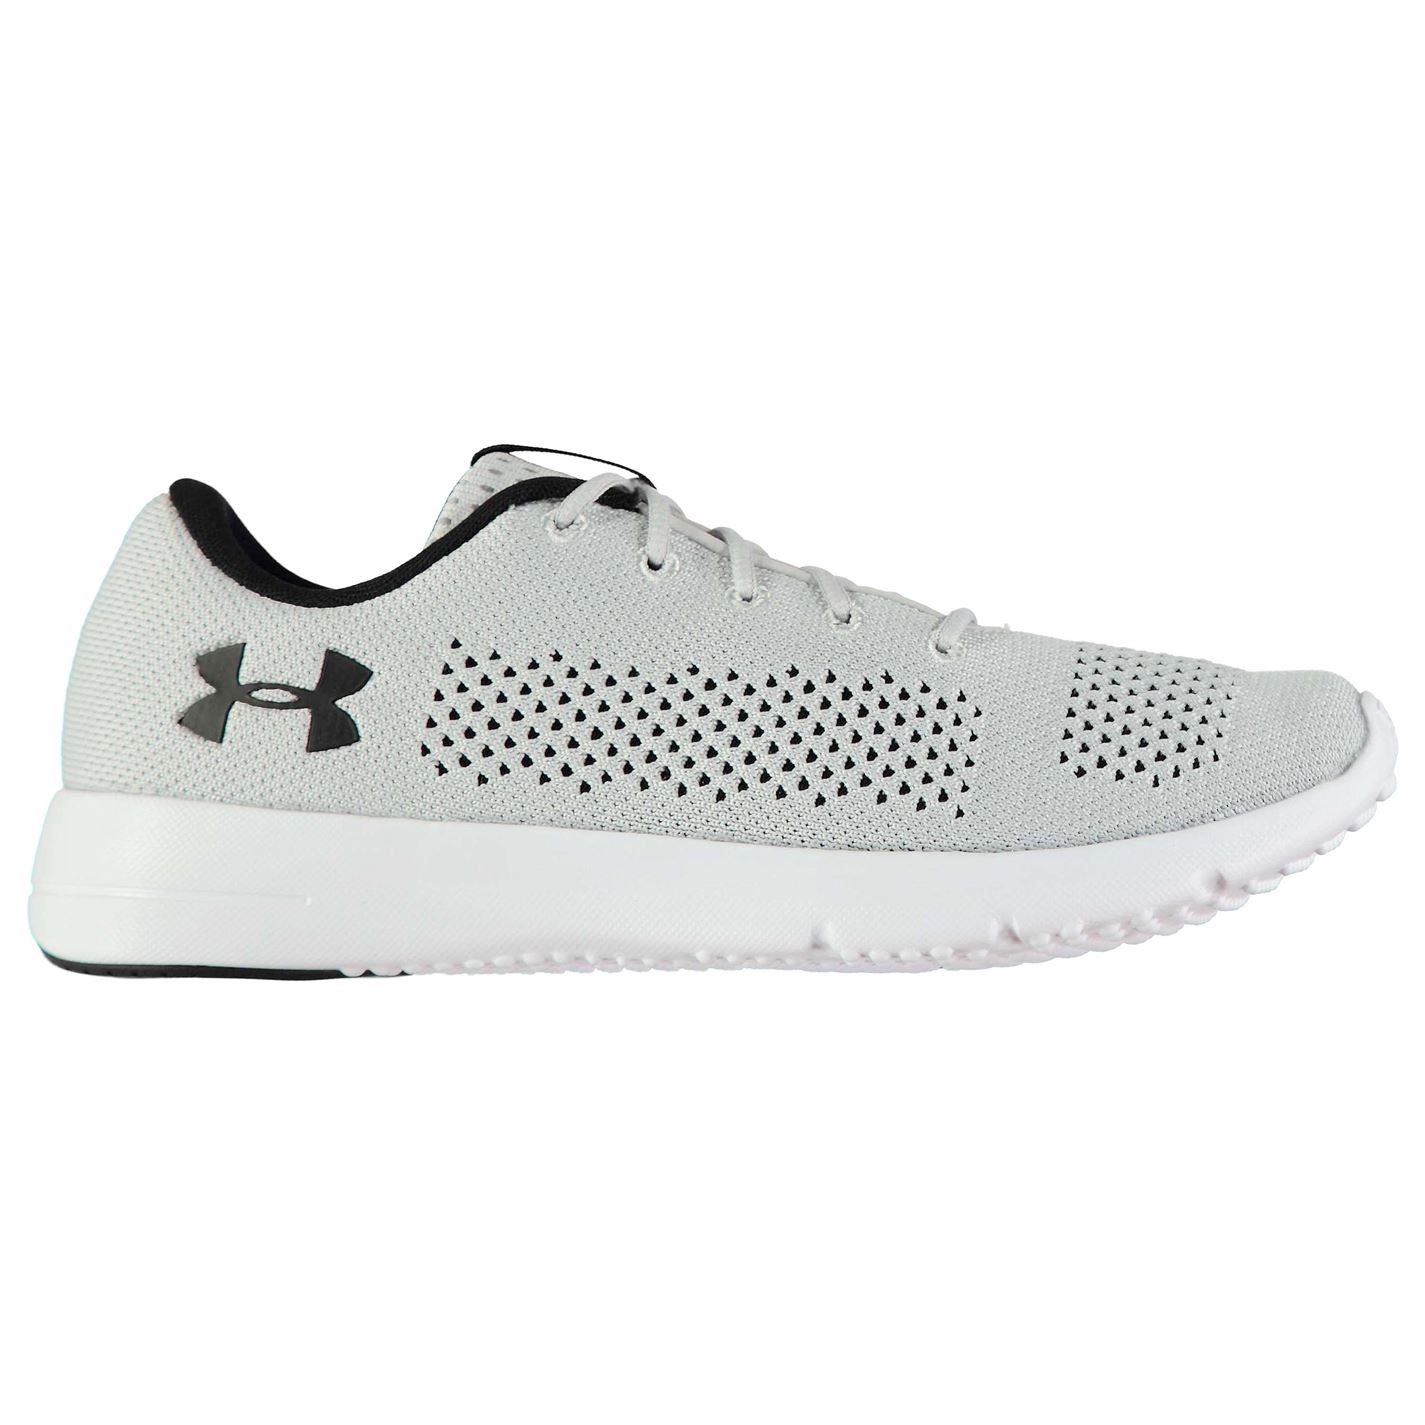 Under Armour Rapid Mens Running Shoes 